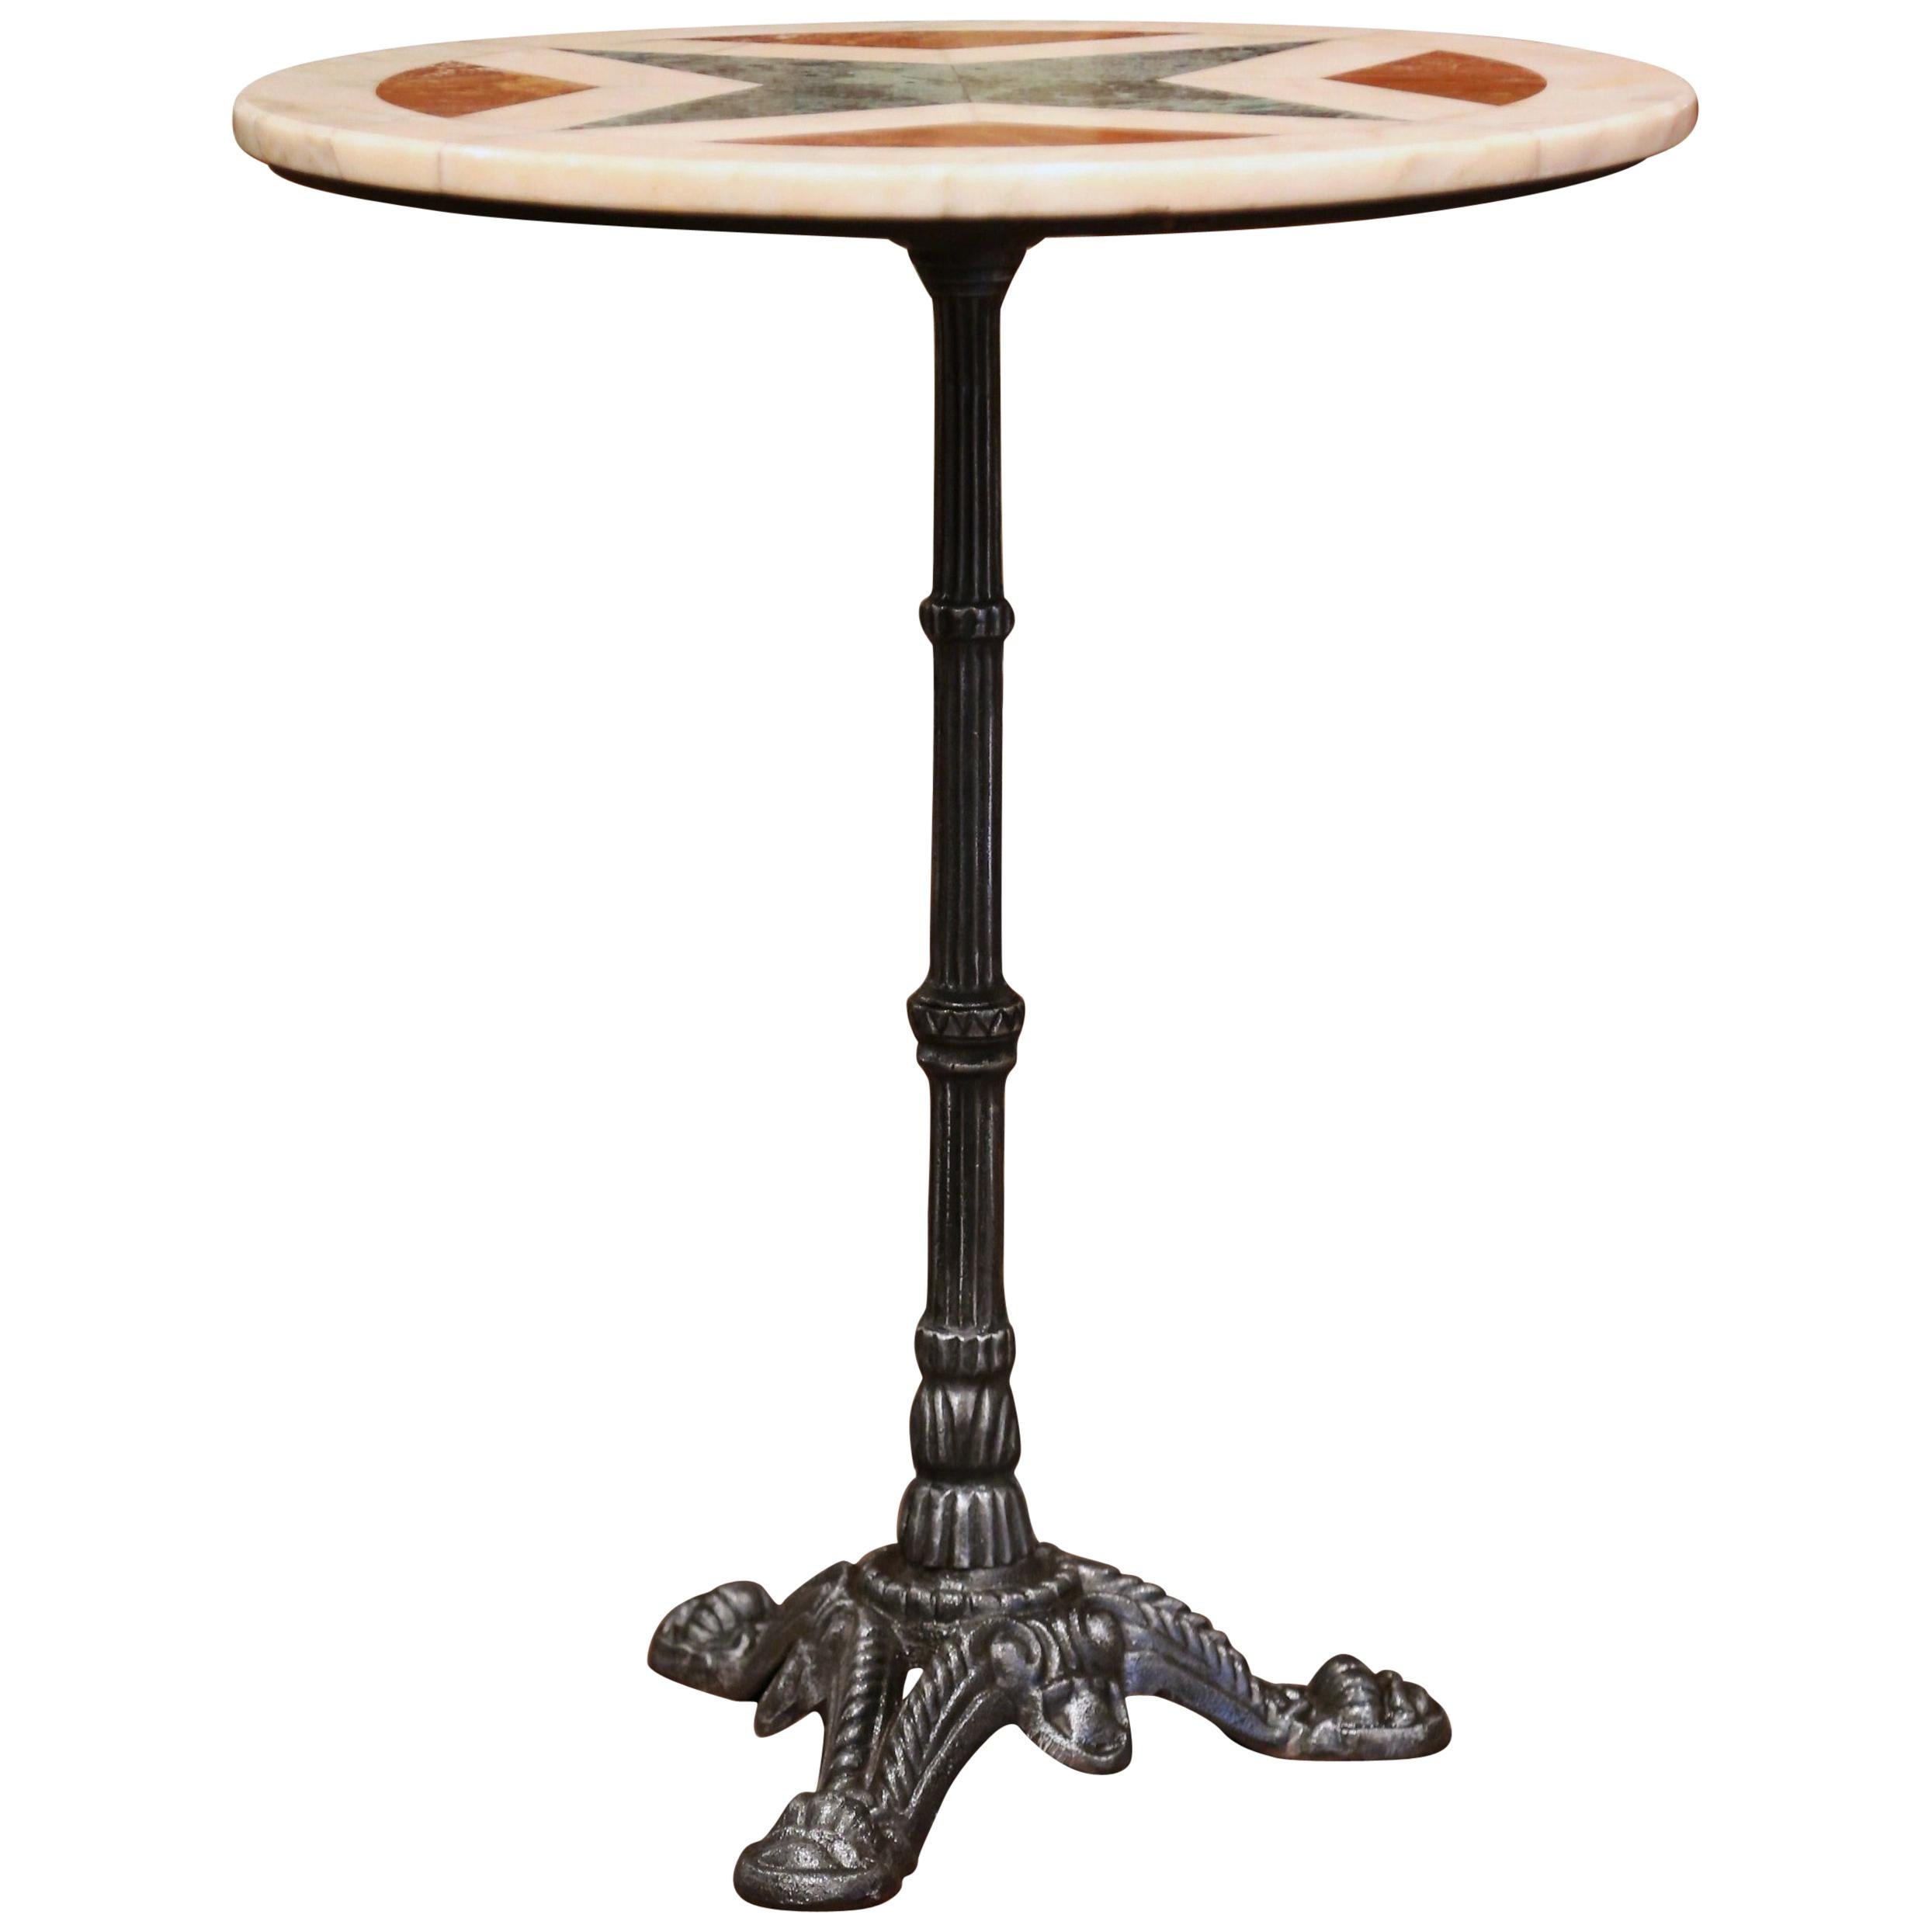 19th Century Napoleon III French Iron and Variegated Marble Gueridon Table